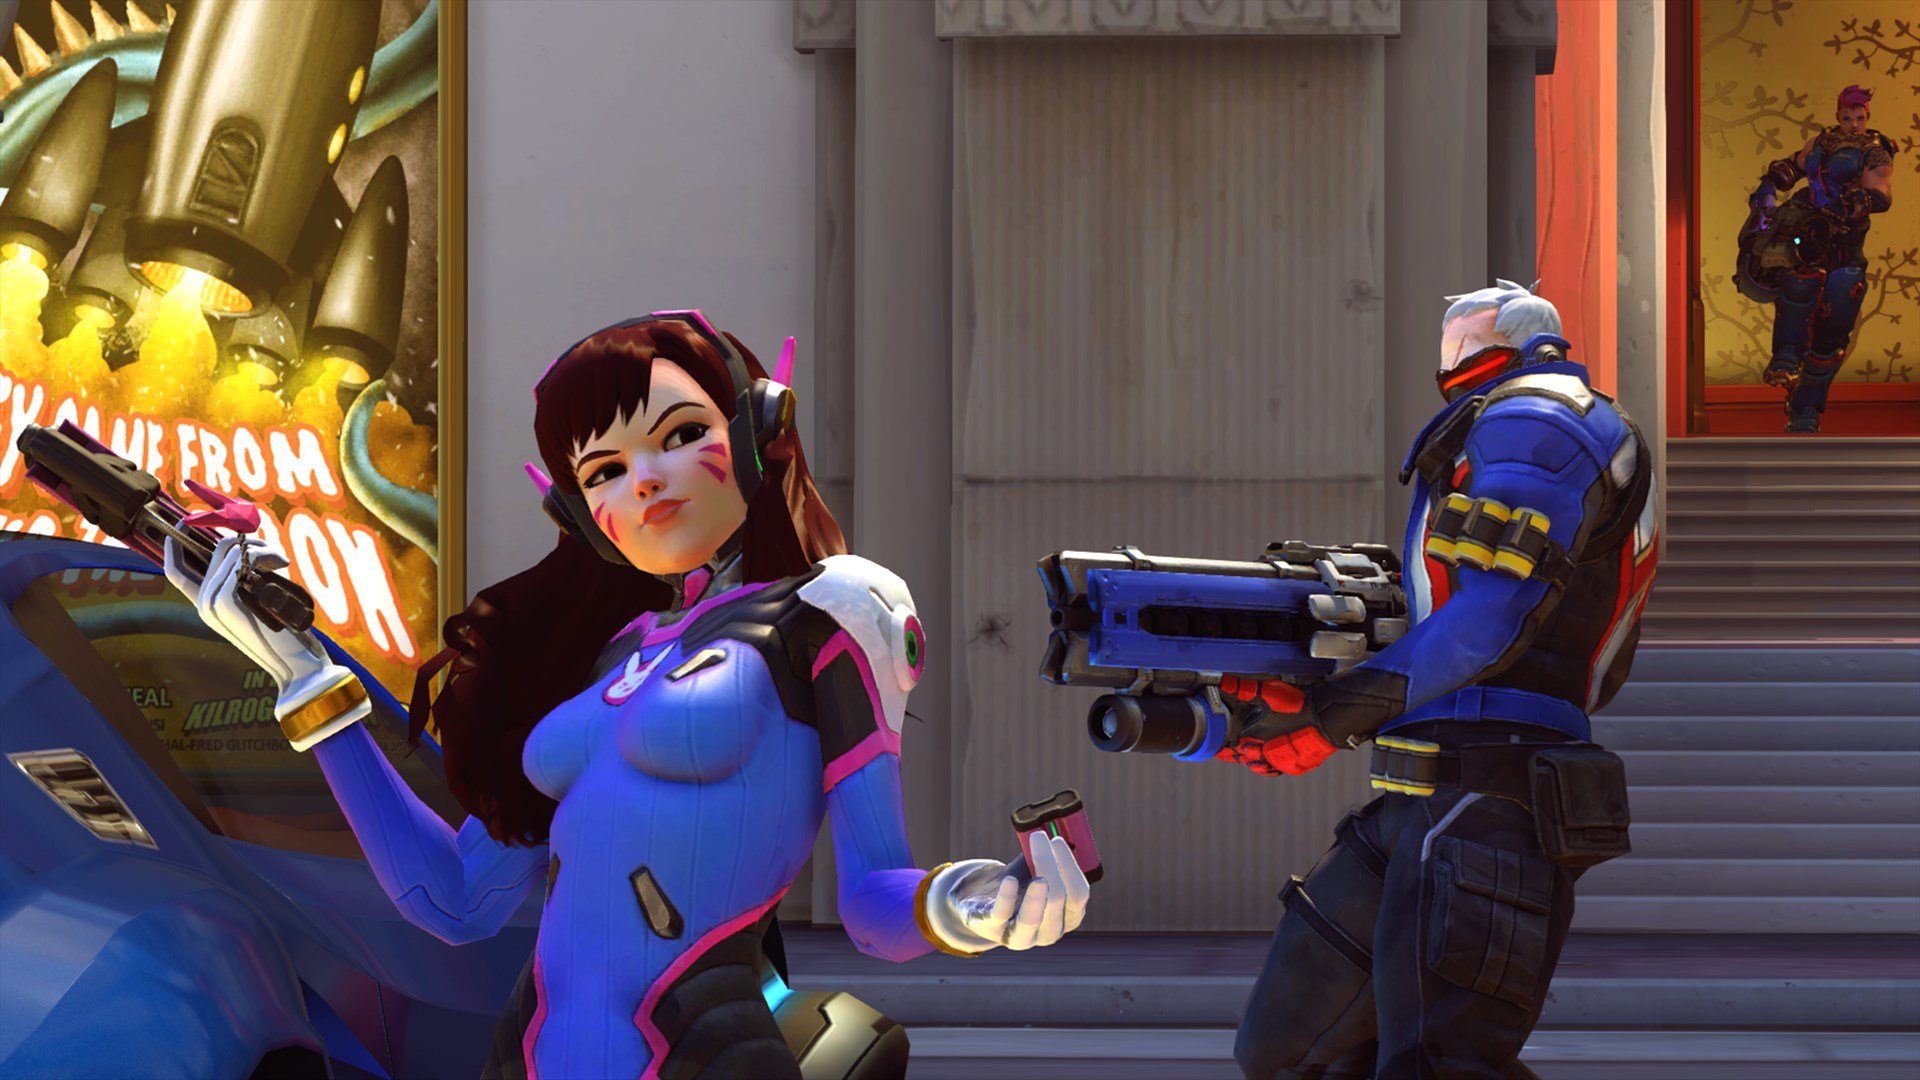 Soldier 76 aiming at D.Va in Overwatch